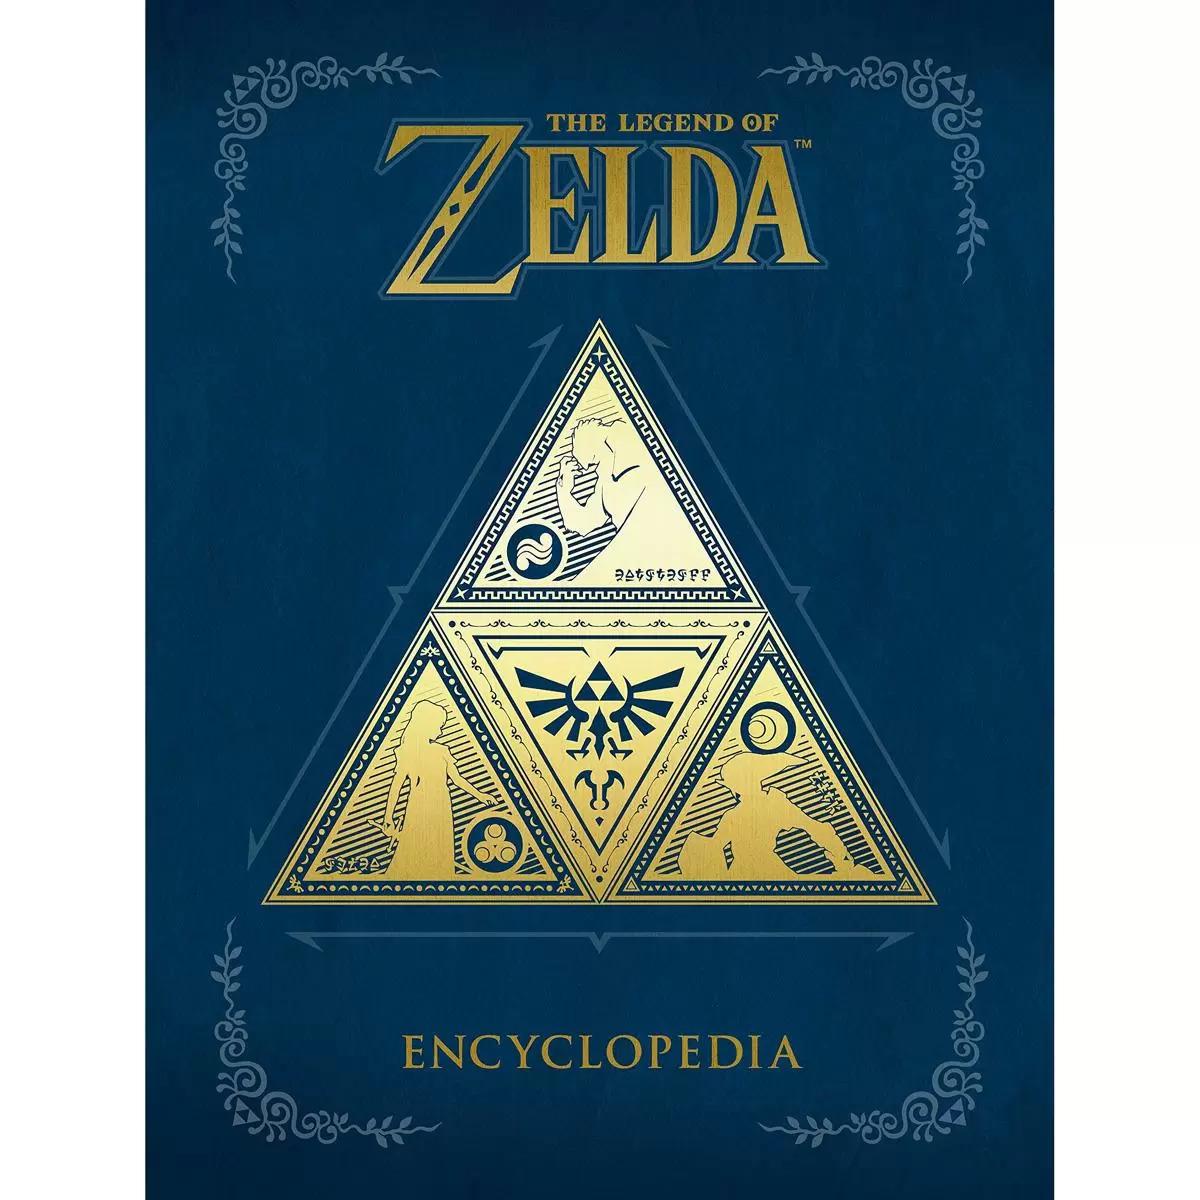 The Legend of Zelda Encyclopedia Book for $20.83 Shipped